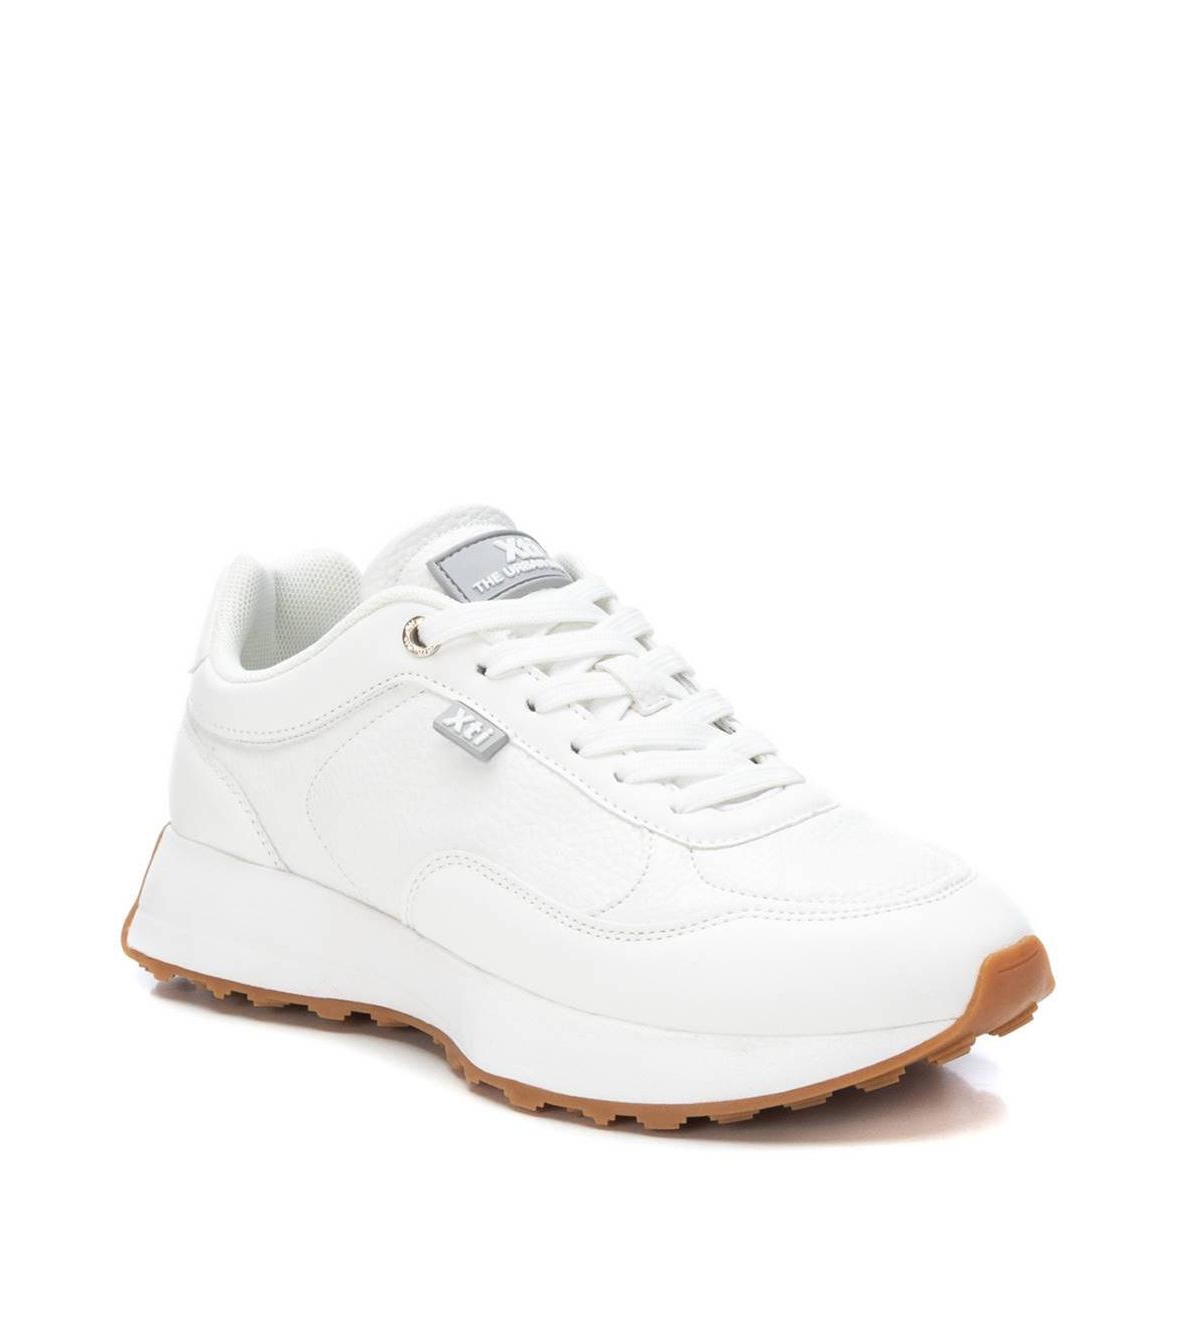 Women's Lace-Up Sneakers By Xti - White